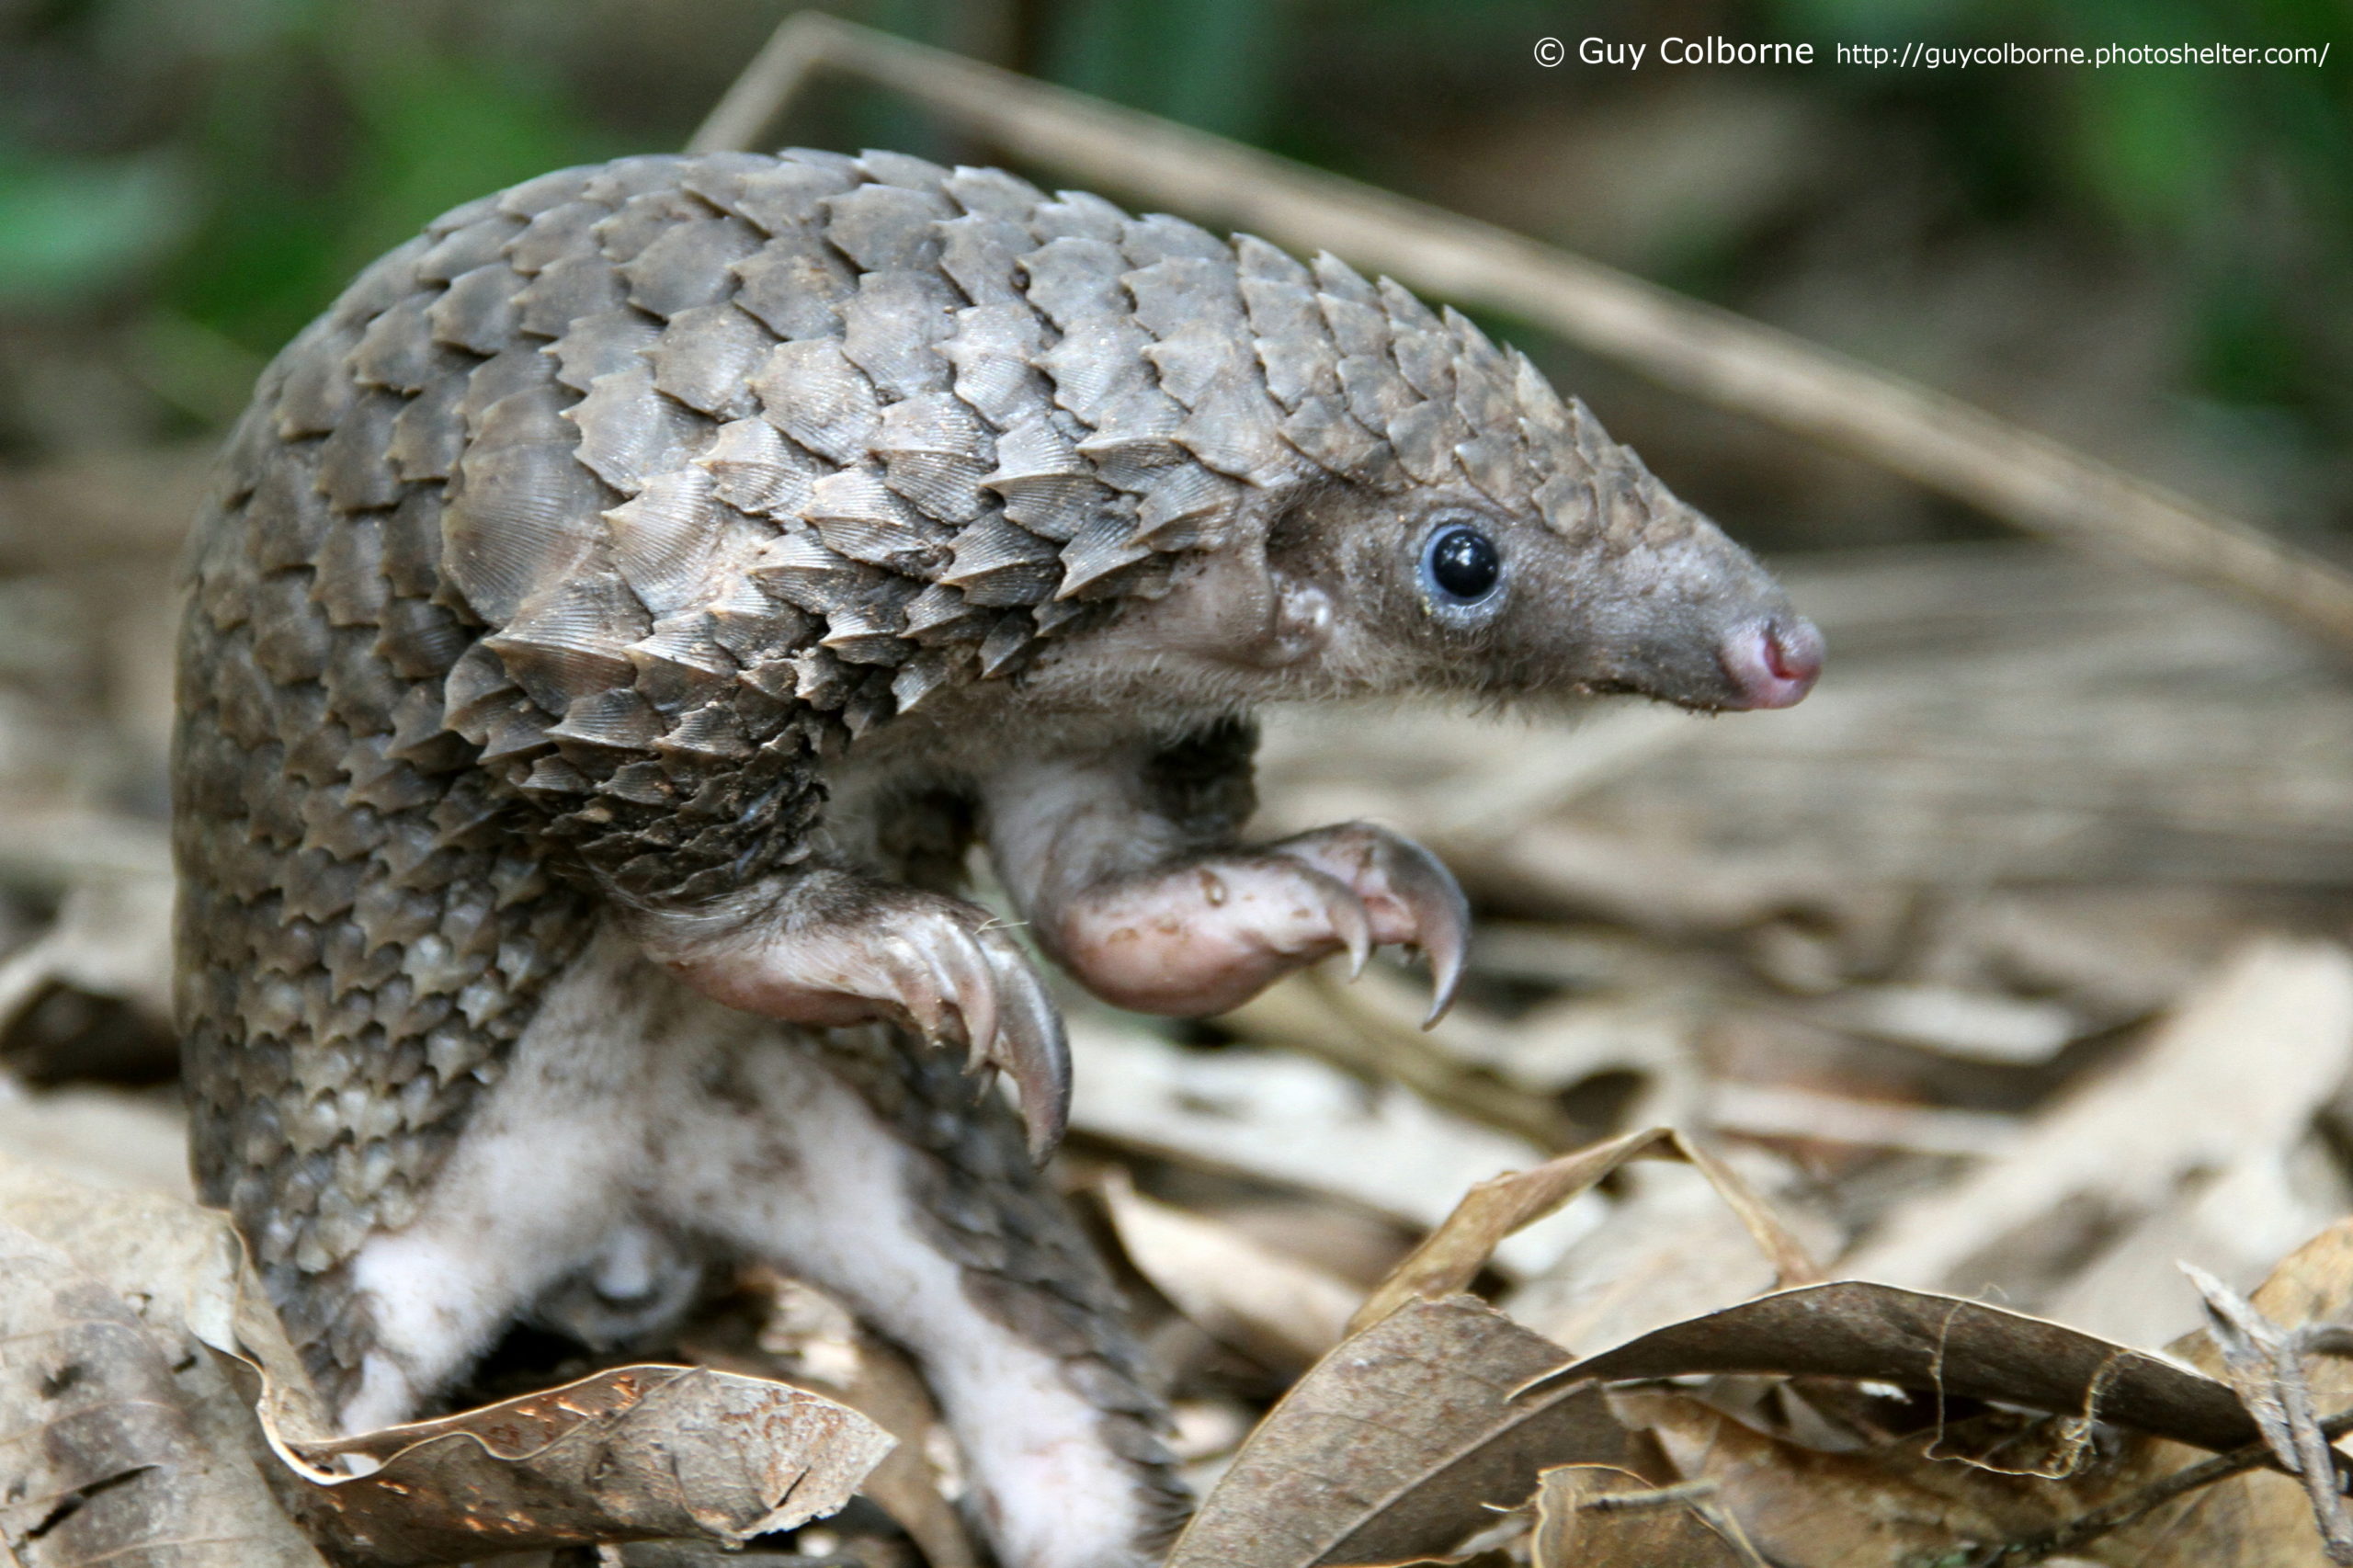 The complete family tree of extant pangolins provides suitable genetic markers for tracking the world’s most trafficked mammals